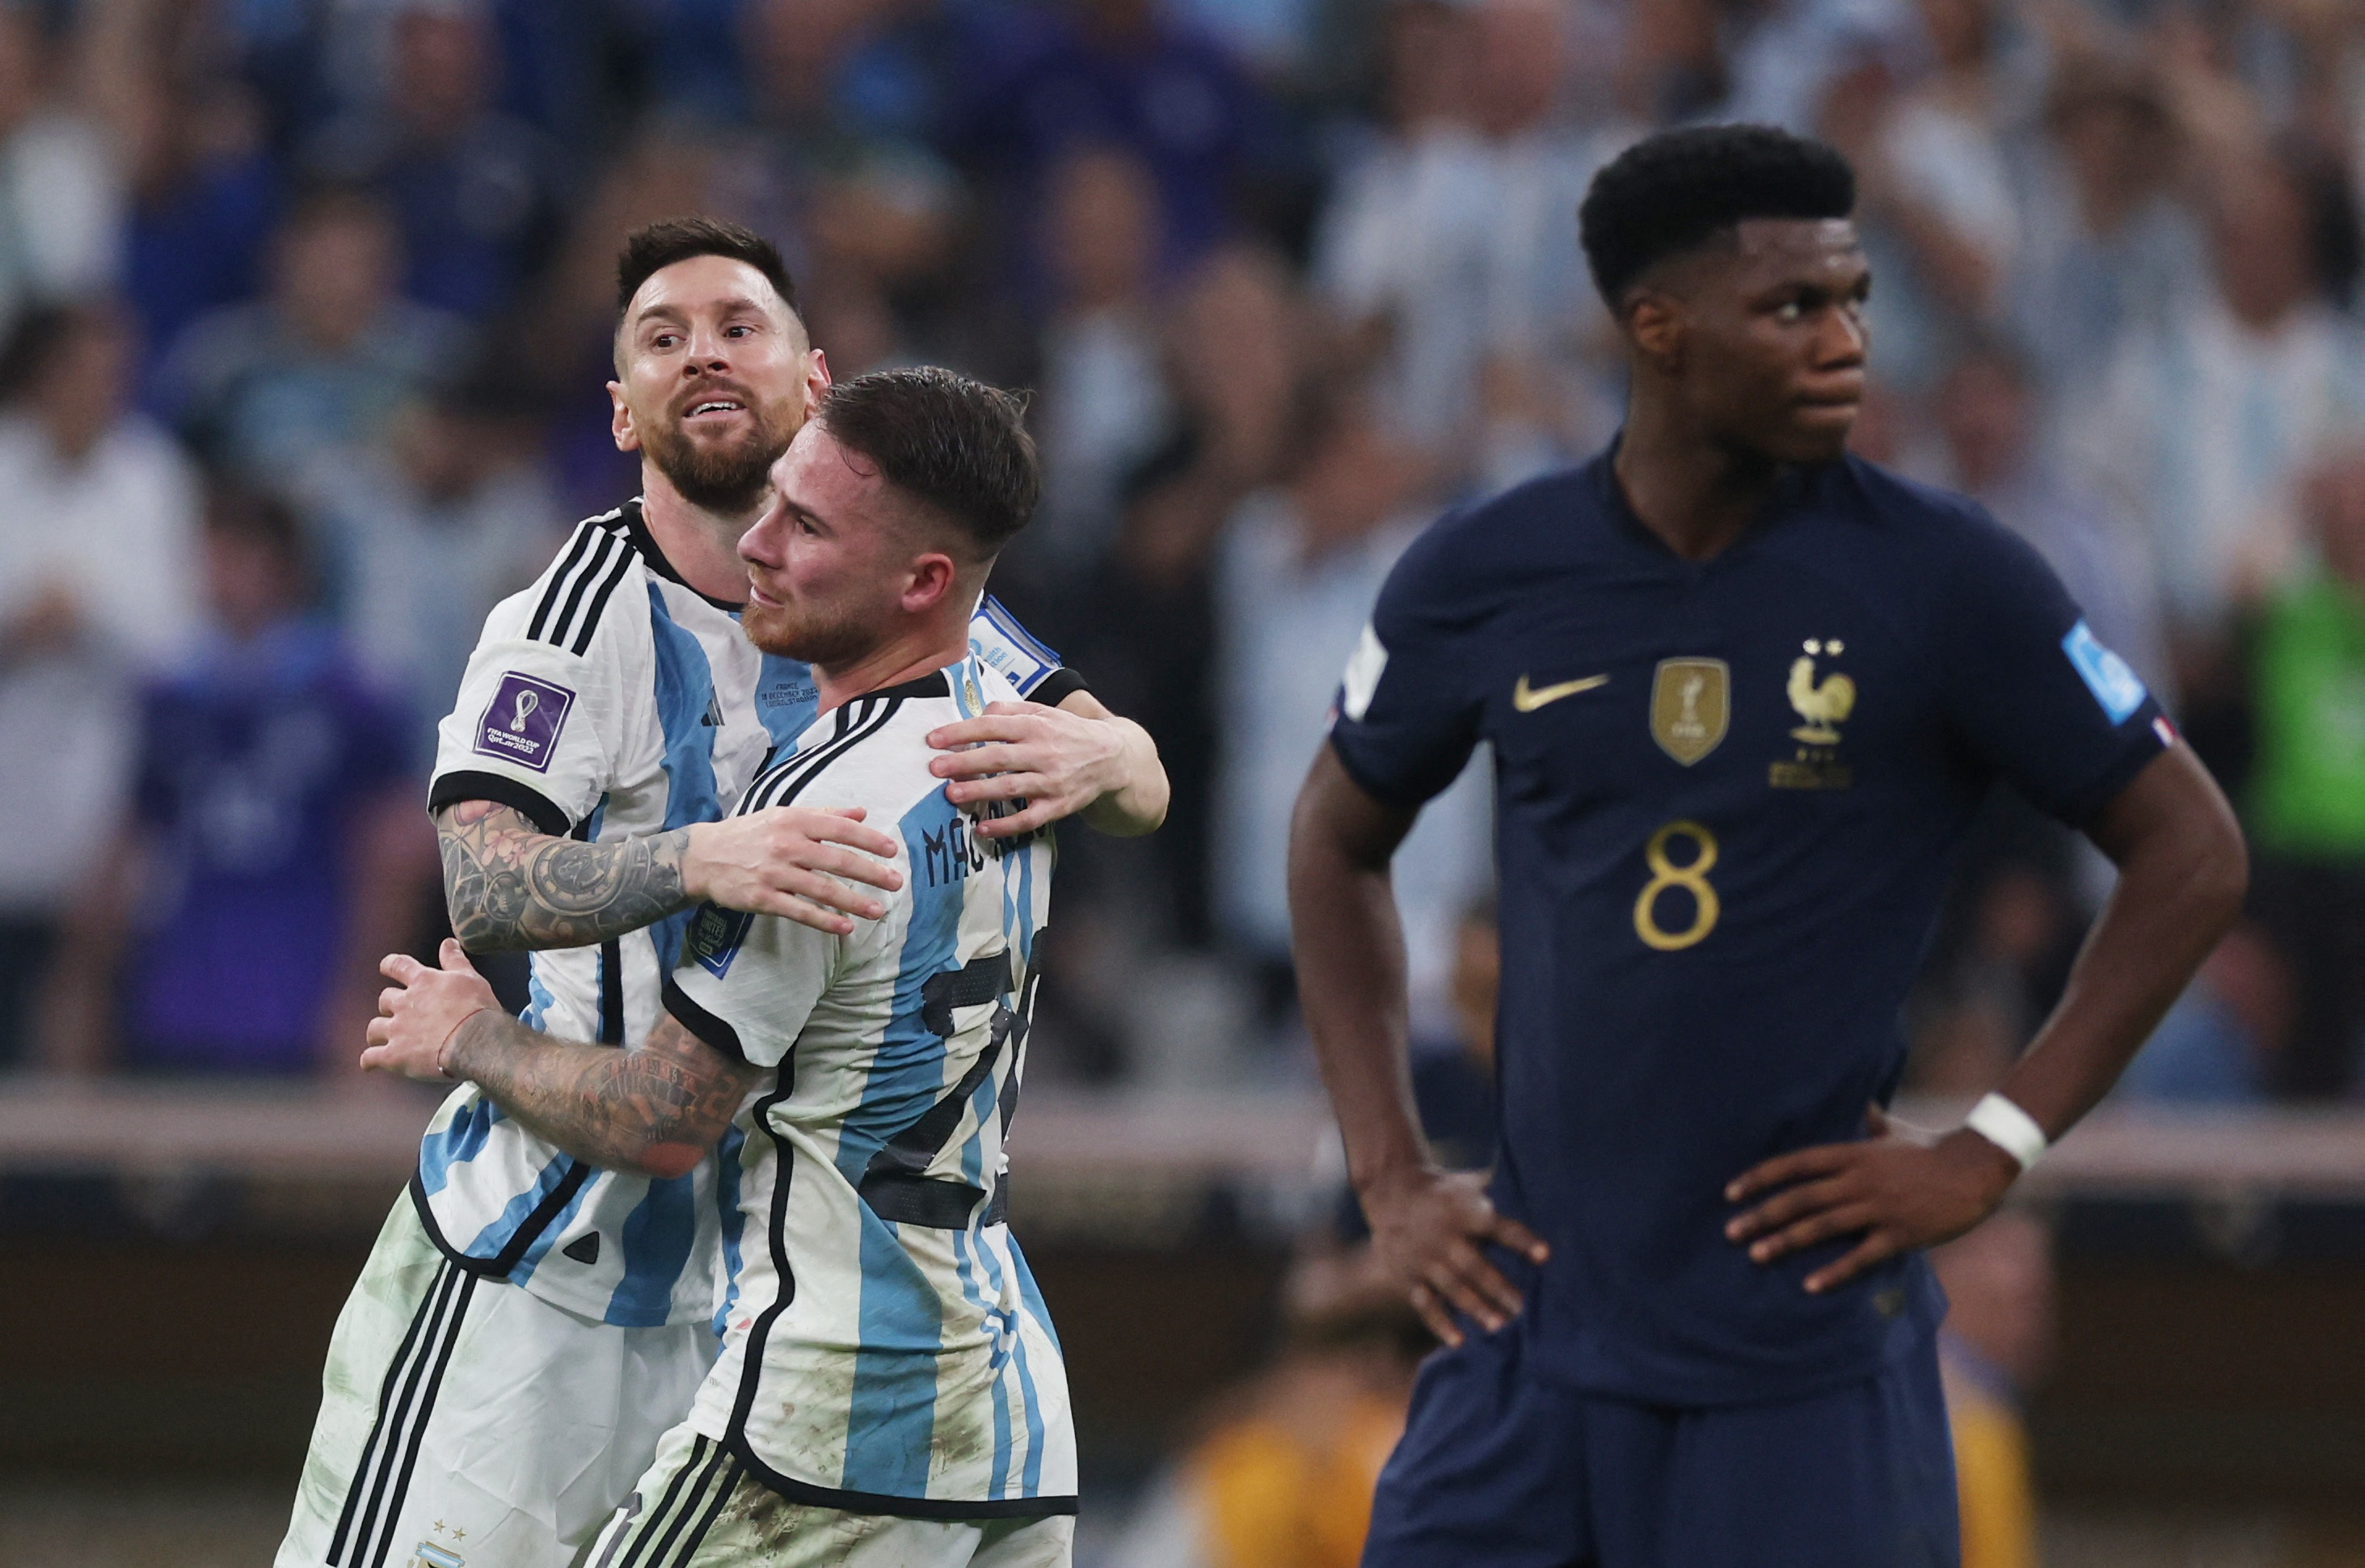 Soccer Football - FIFA World Cup Qatar 2022 - Final - Argentina v France - Lusail Stadium, Lusail, Qatar - December 18, 2022 Argentina's Lionel Messi celebrates scoring their third goal with Alexis Mac Allister REUTERS/Lee Smith